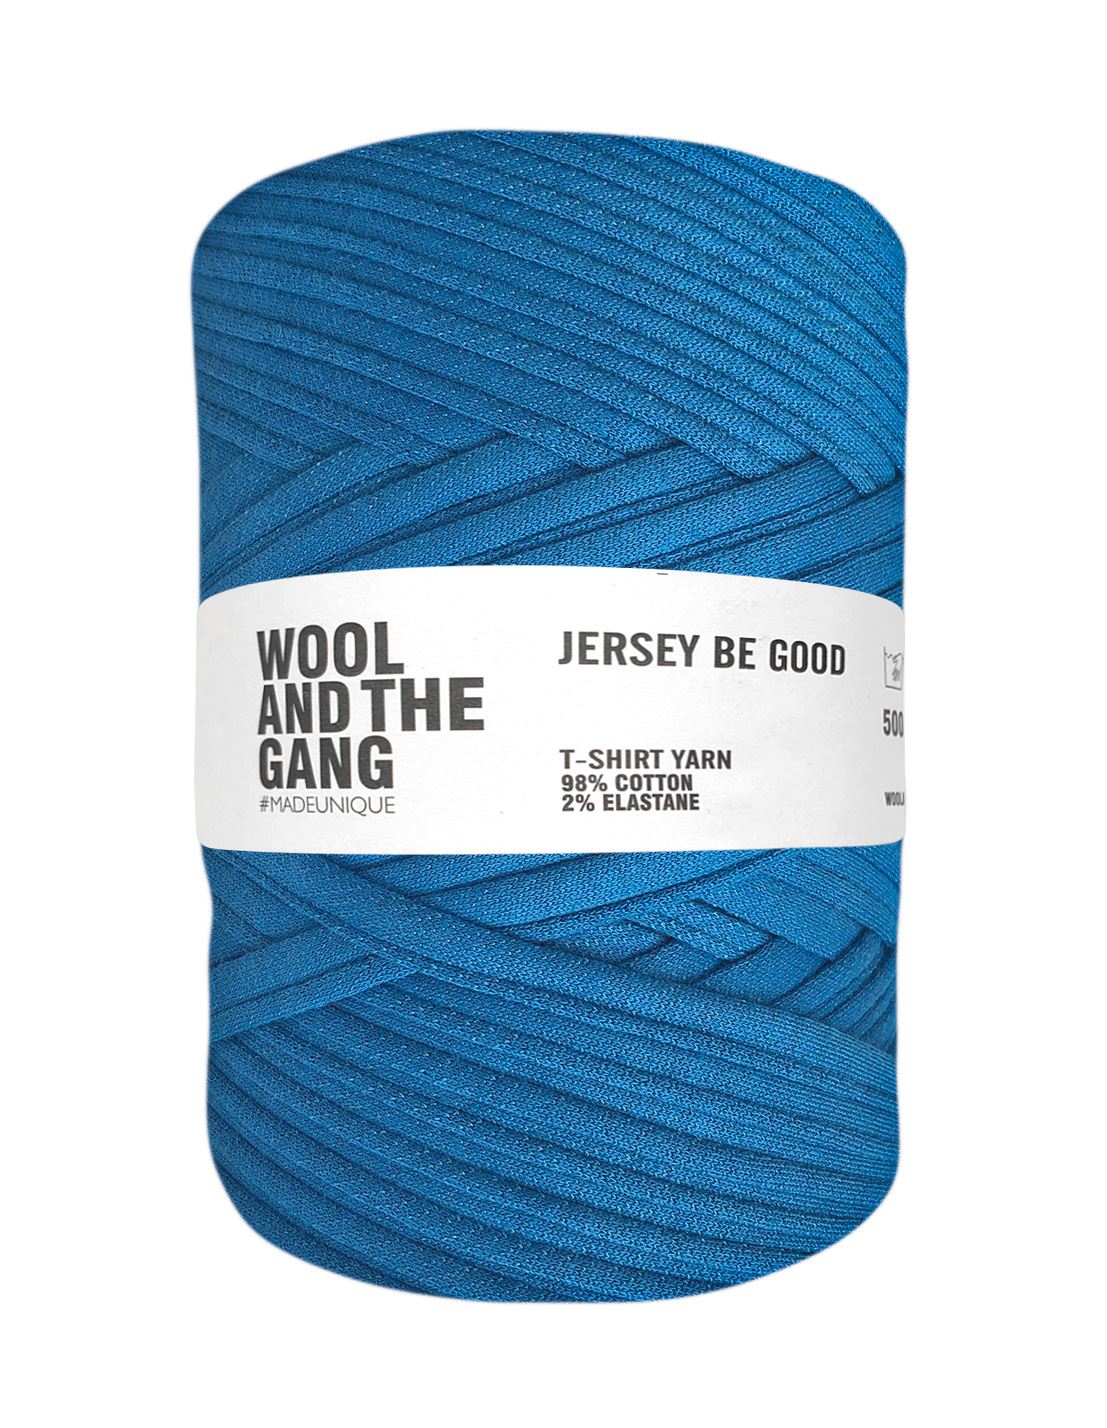 True Blue Jersey Be Good t-shirt yarn by Wool and the Gang (500g)